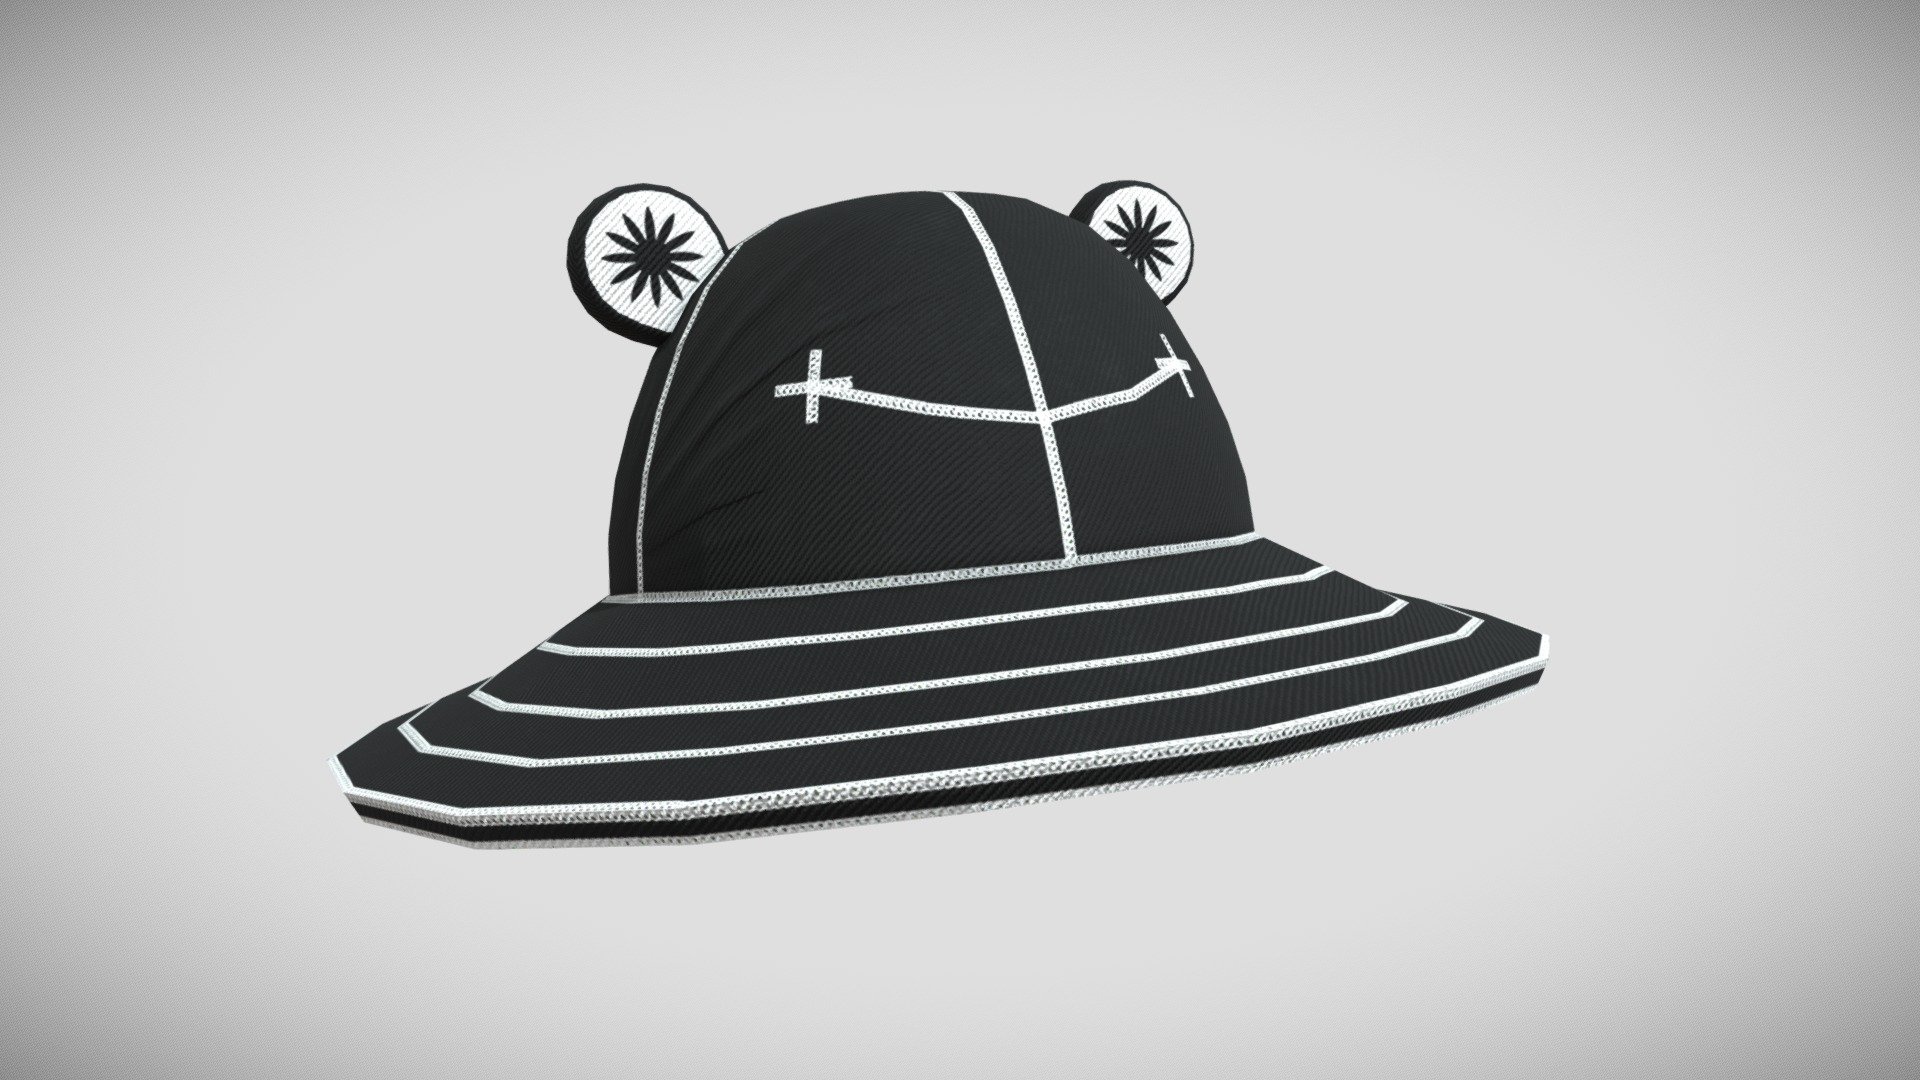 A bucket hat with smily frog. I made 3 versions of the hat, this is the Black version. The others can be found here:

Green:
https://sketchfab.com/3d-models/green-frog-hat-f1dc04e89d594c5f9c6beb9a76652660

White:
https://sketchfab.com/3d-models/white-frog-hat-e5d82ab2d6b04f8382293035e03601de

Modelled in Maya, textured in Substance Painter, entirely by me 3d model